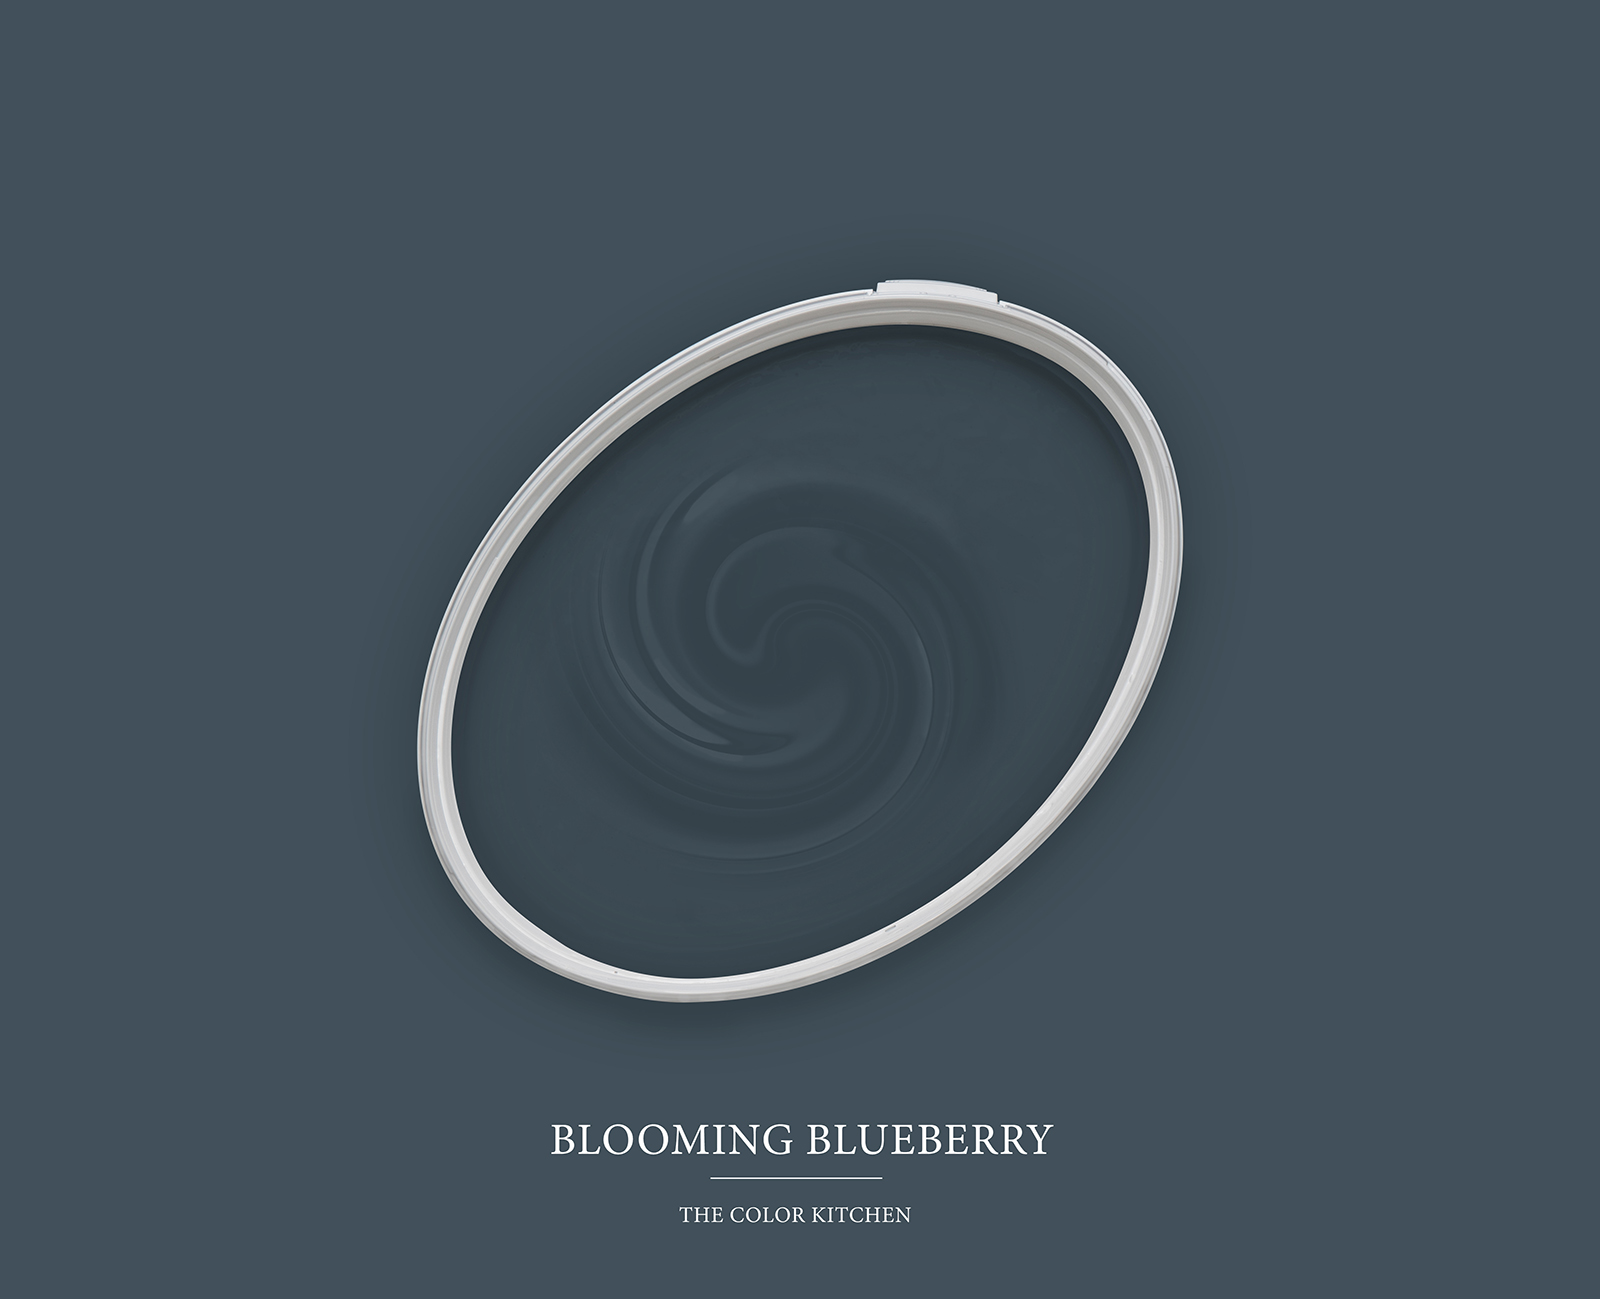 Wall Paint TCK3013 »Blooming Blueberry« in magnificent dark blue – 5.0 litre
